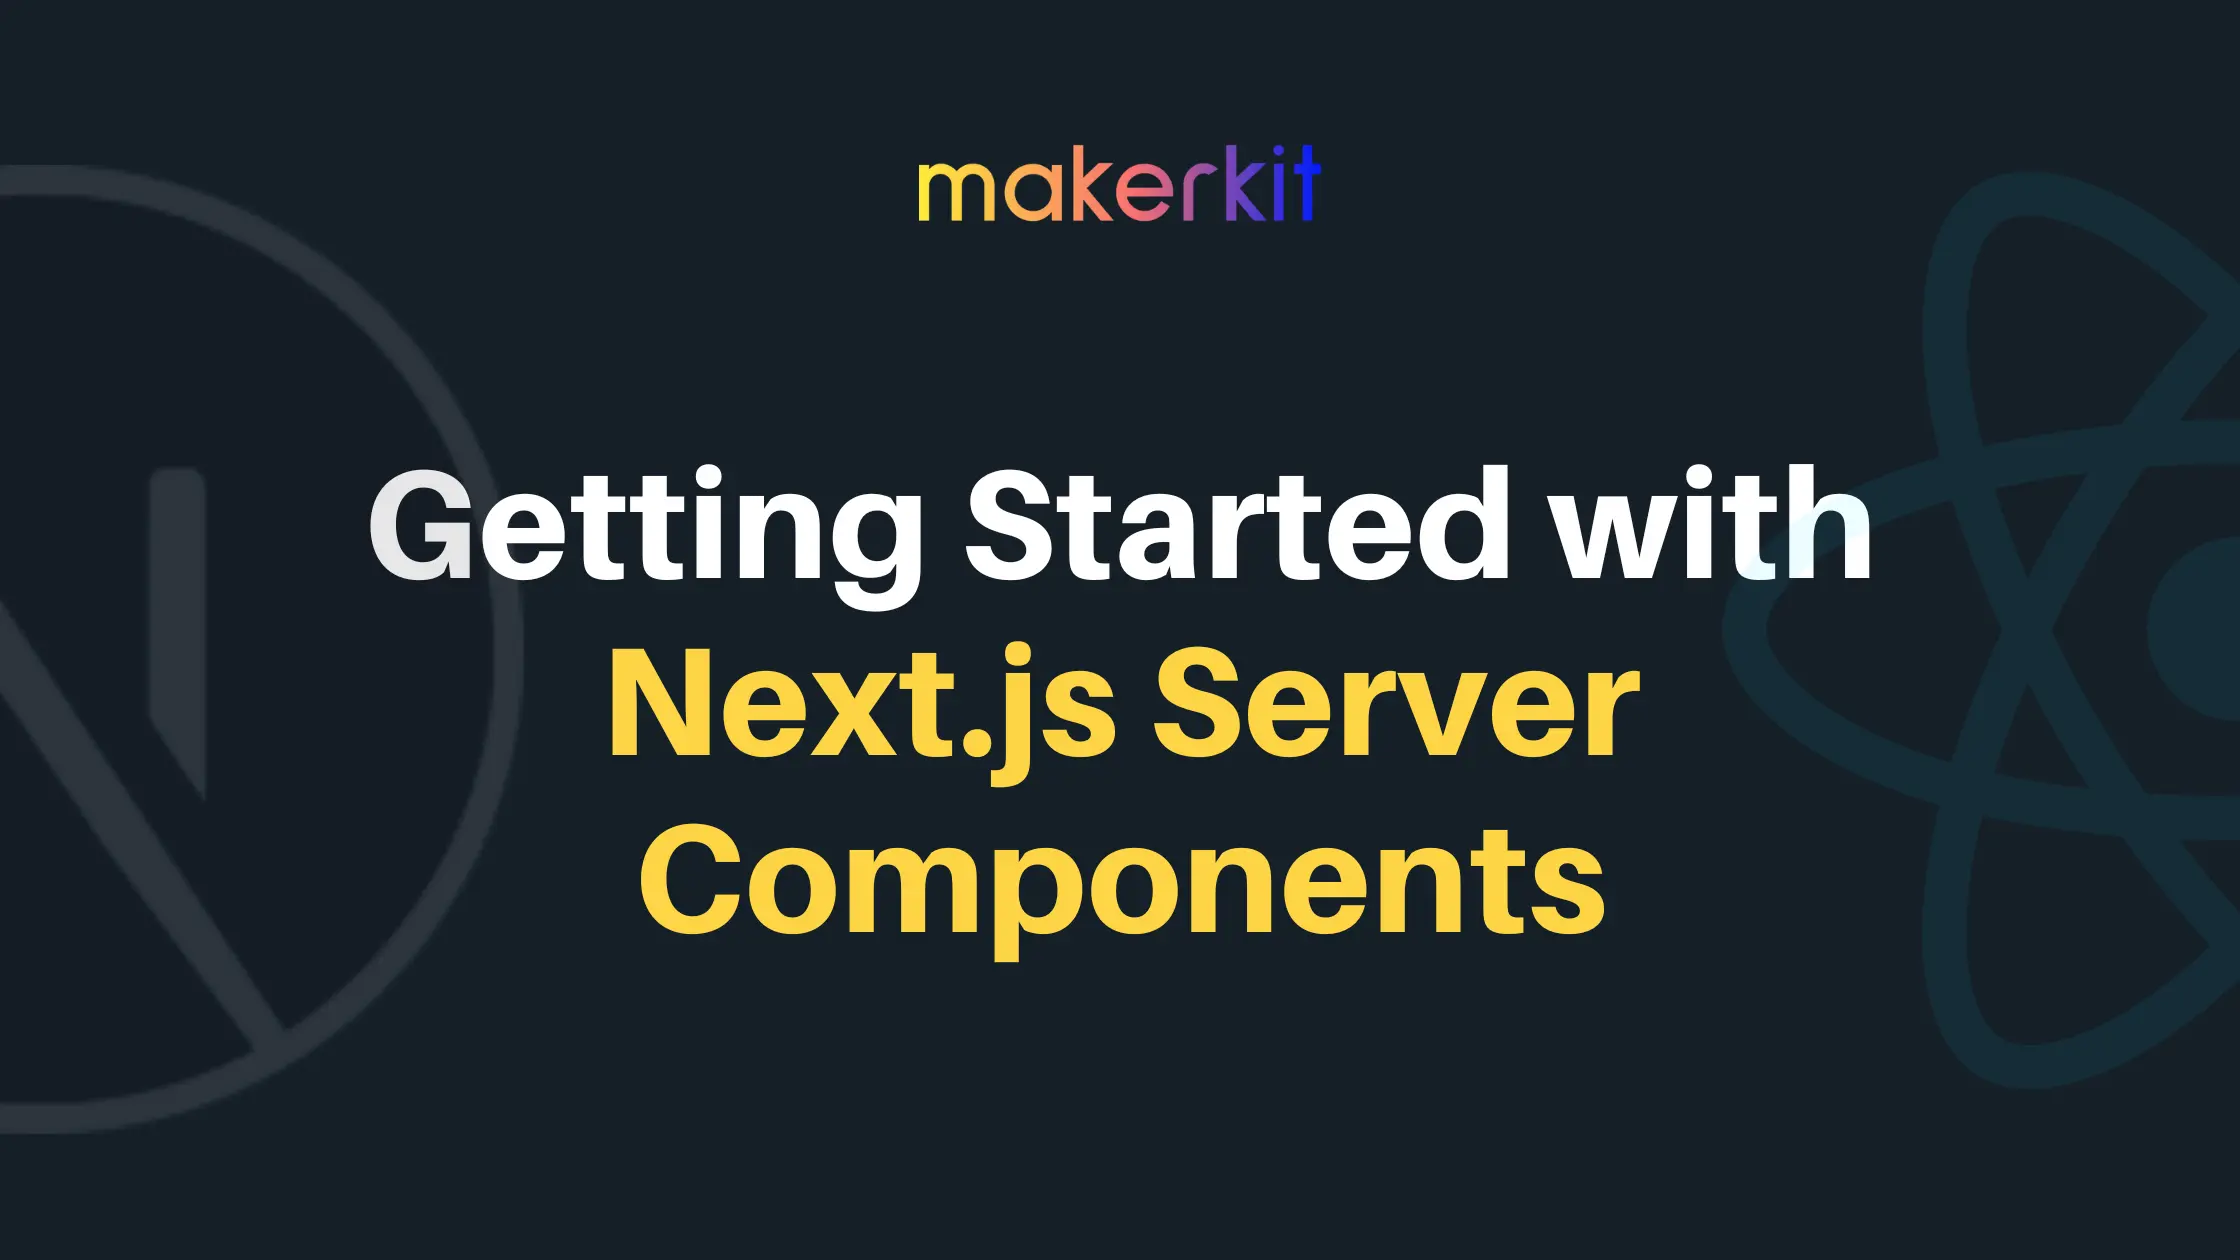 Cover Image for Getting Started with Next.js Server Components